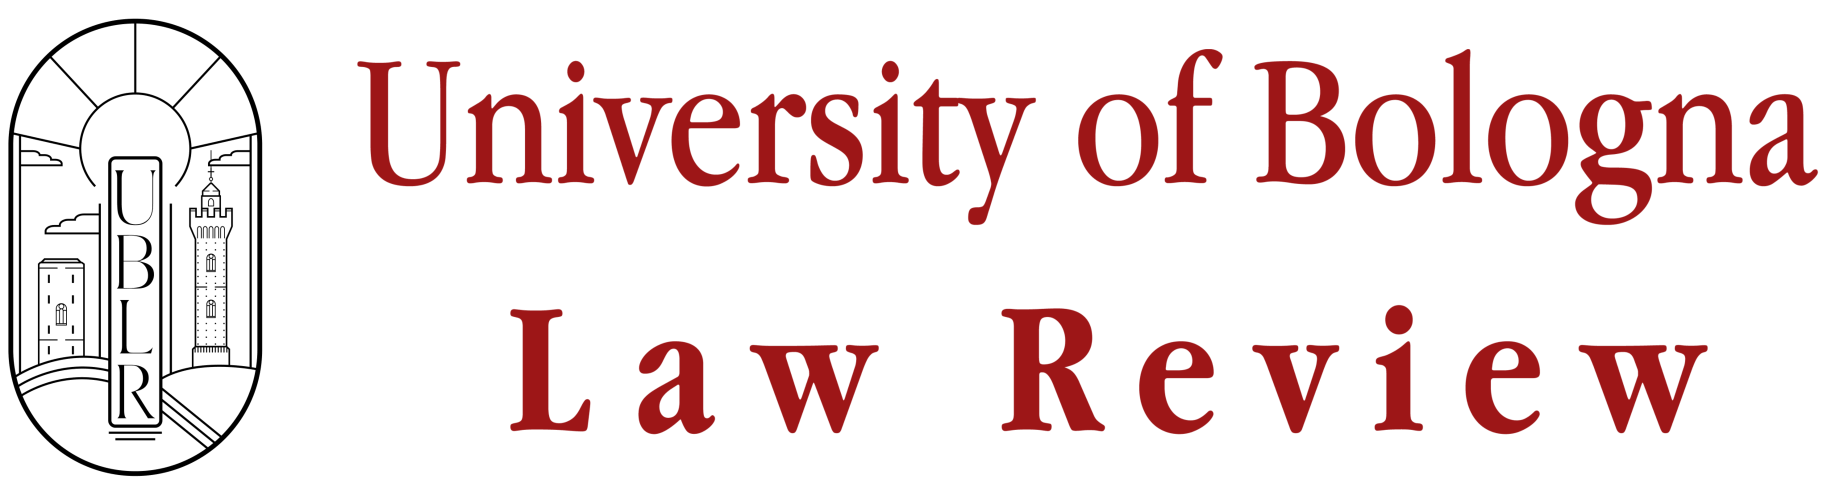 University of Bologna Law Review